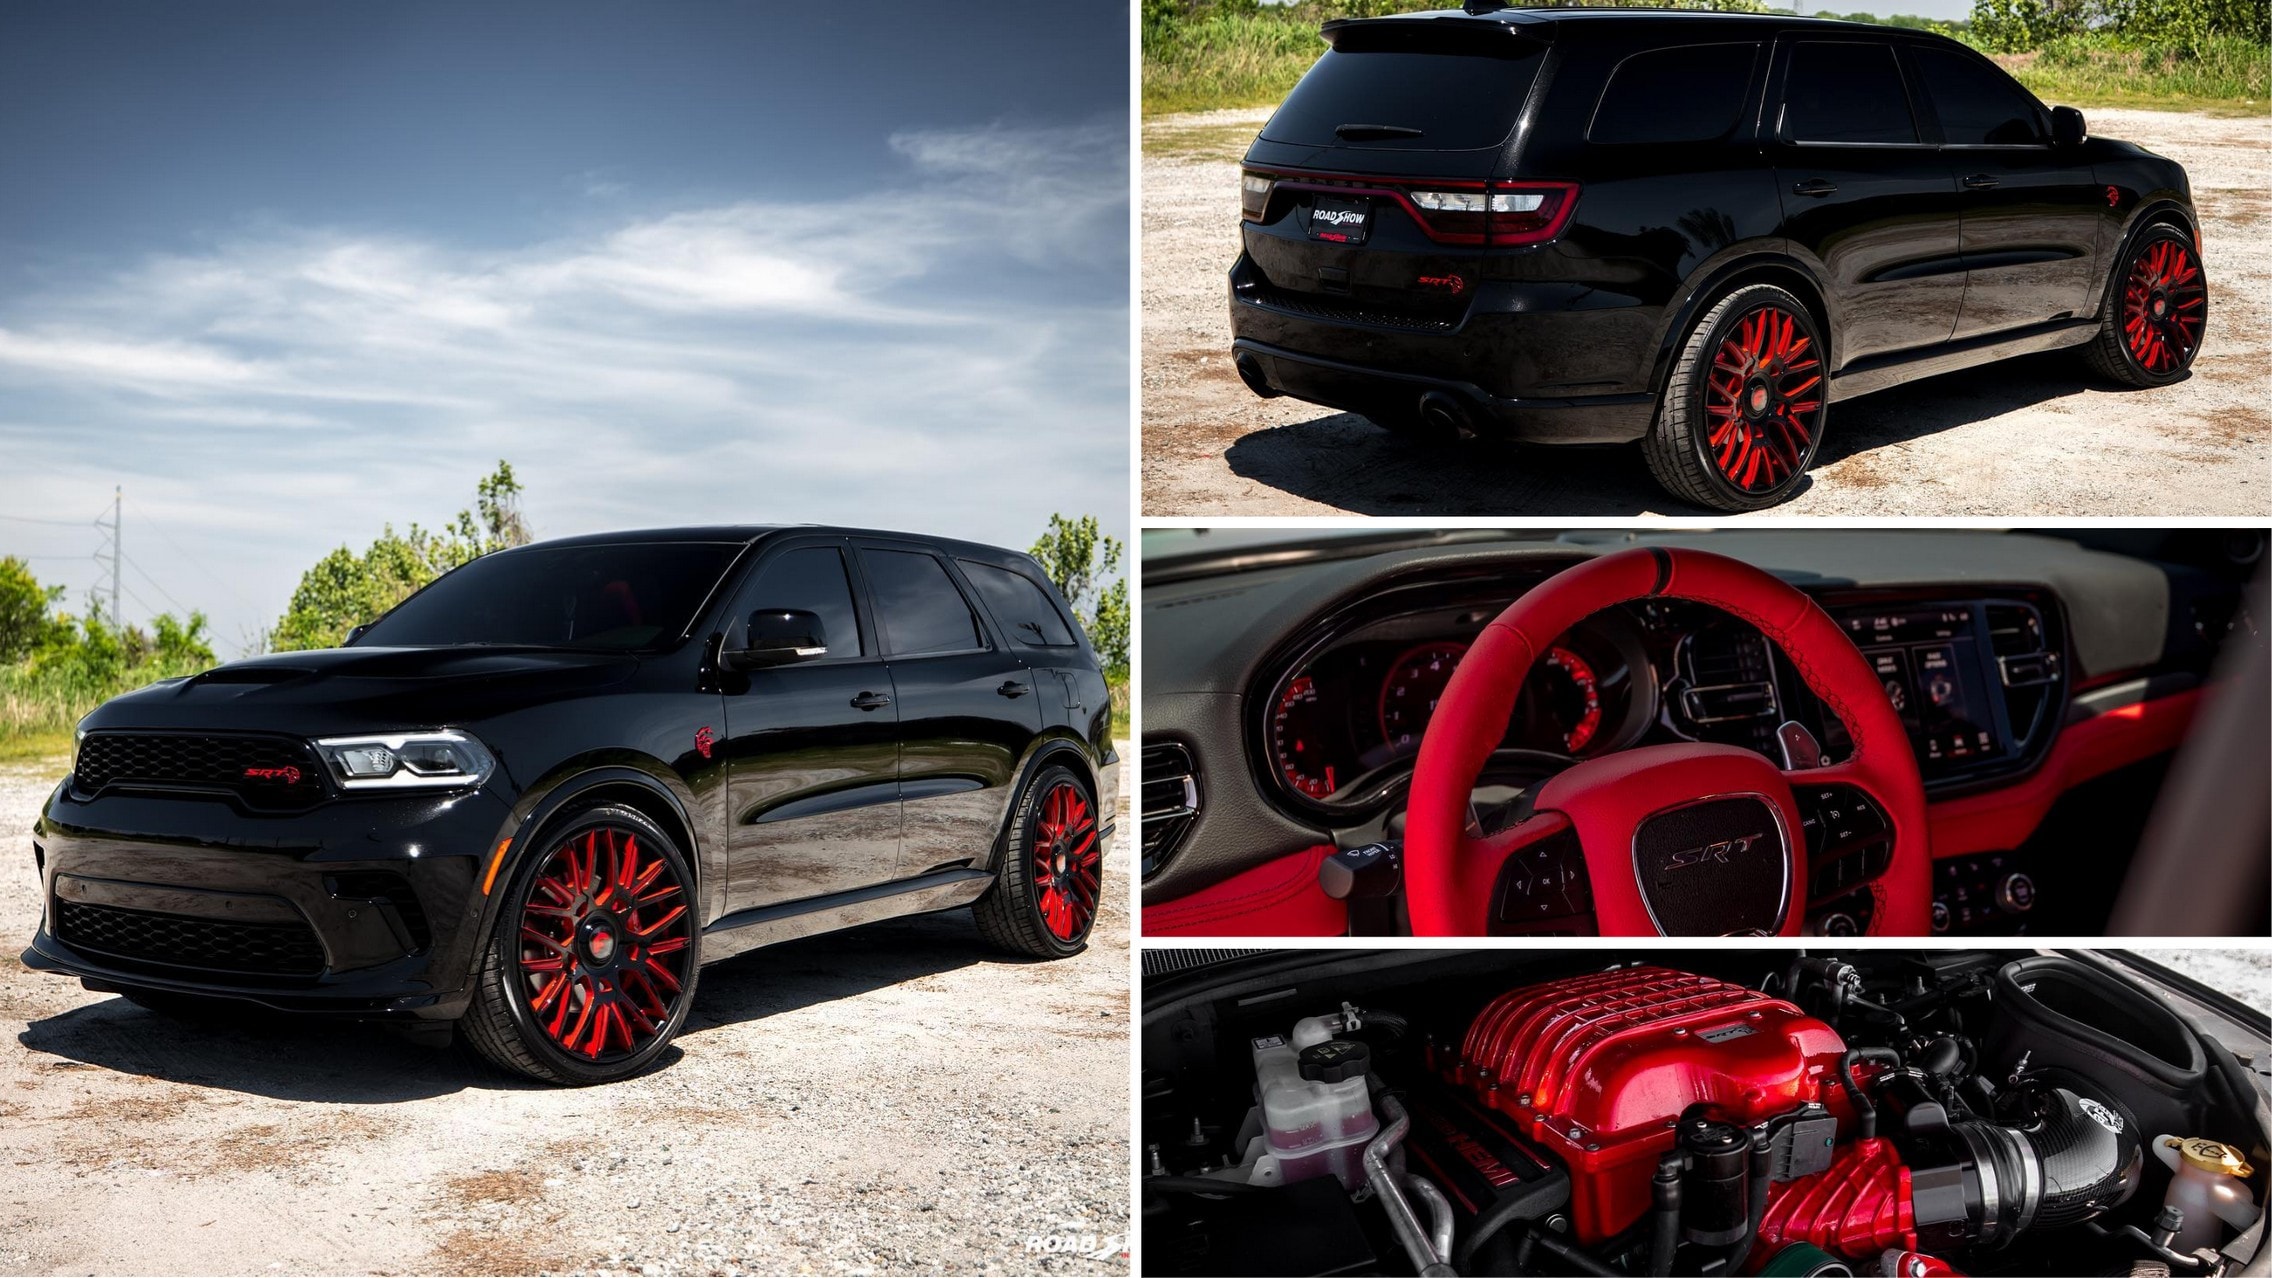 https://s1.cdn.autoevolution.com/images/news/1010-hp-dodge-durango-srt-hellcat-rs-edition-is-red-and-black-literally-everywhere-215531_1.jpg